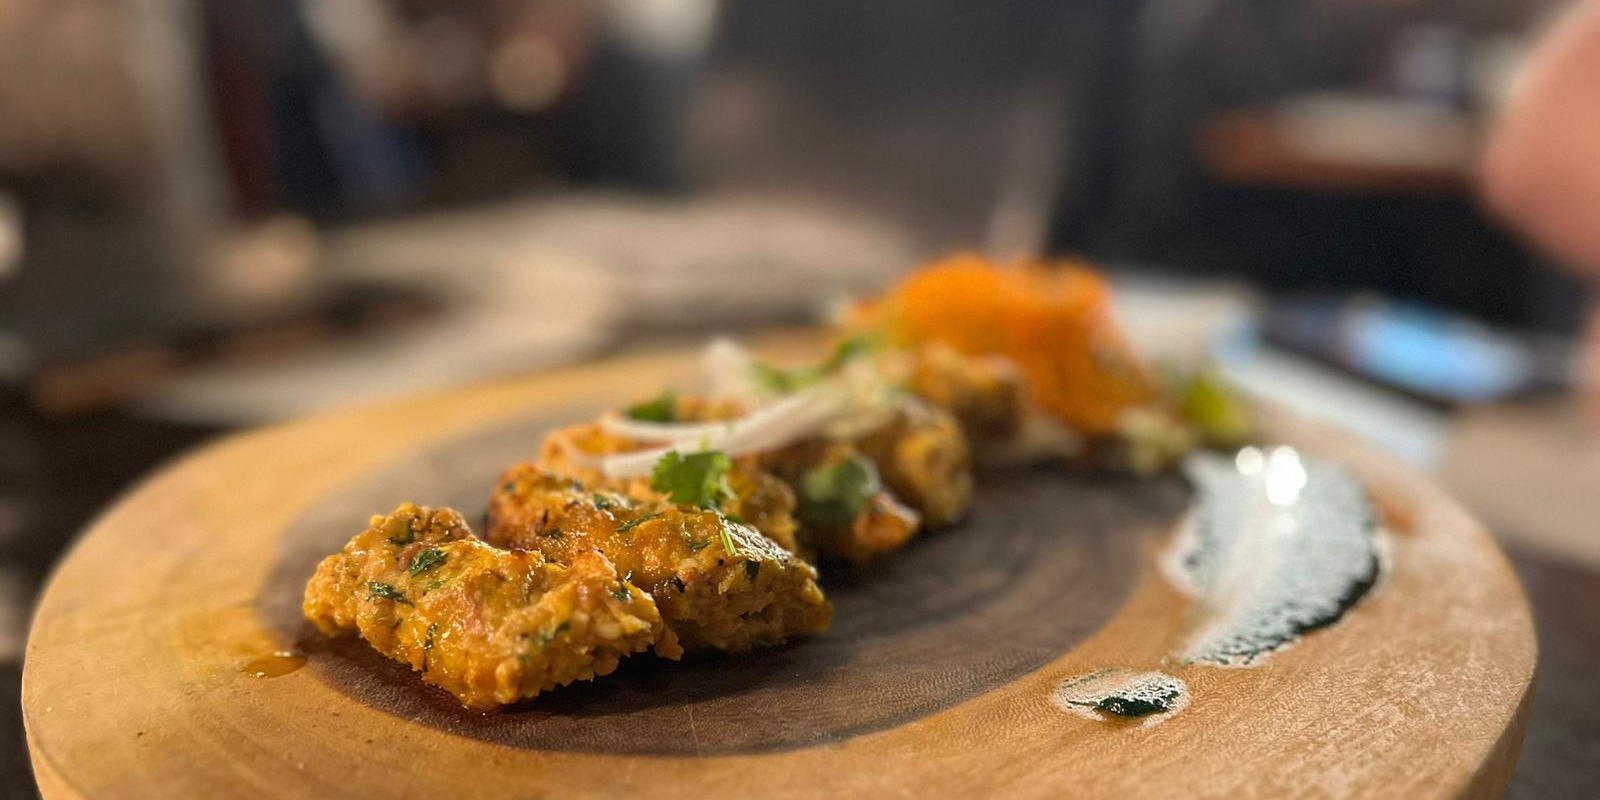 Himalayan Chimney's reshmi chicken kababs beautifully plated on a wooden stump platter with a smear of a white sauce. Photo byRashmi Tenneti.